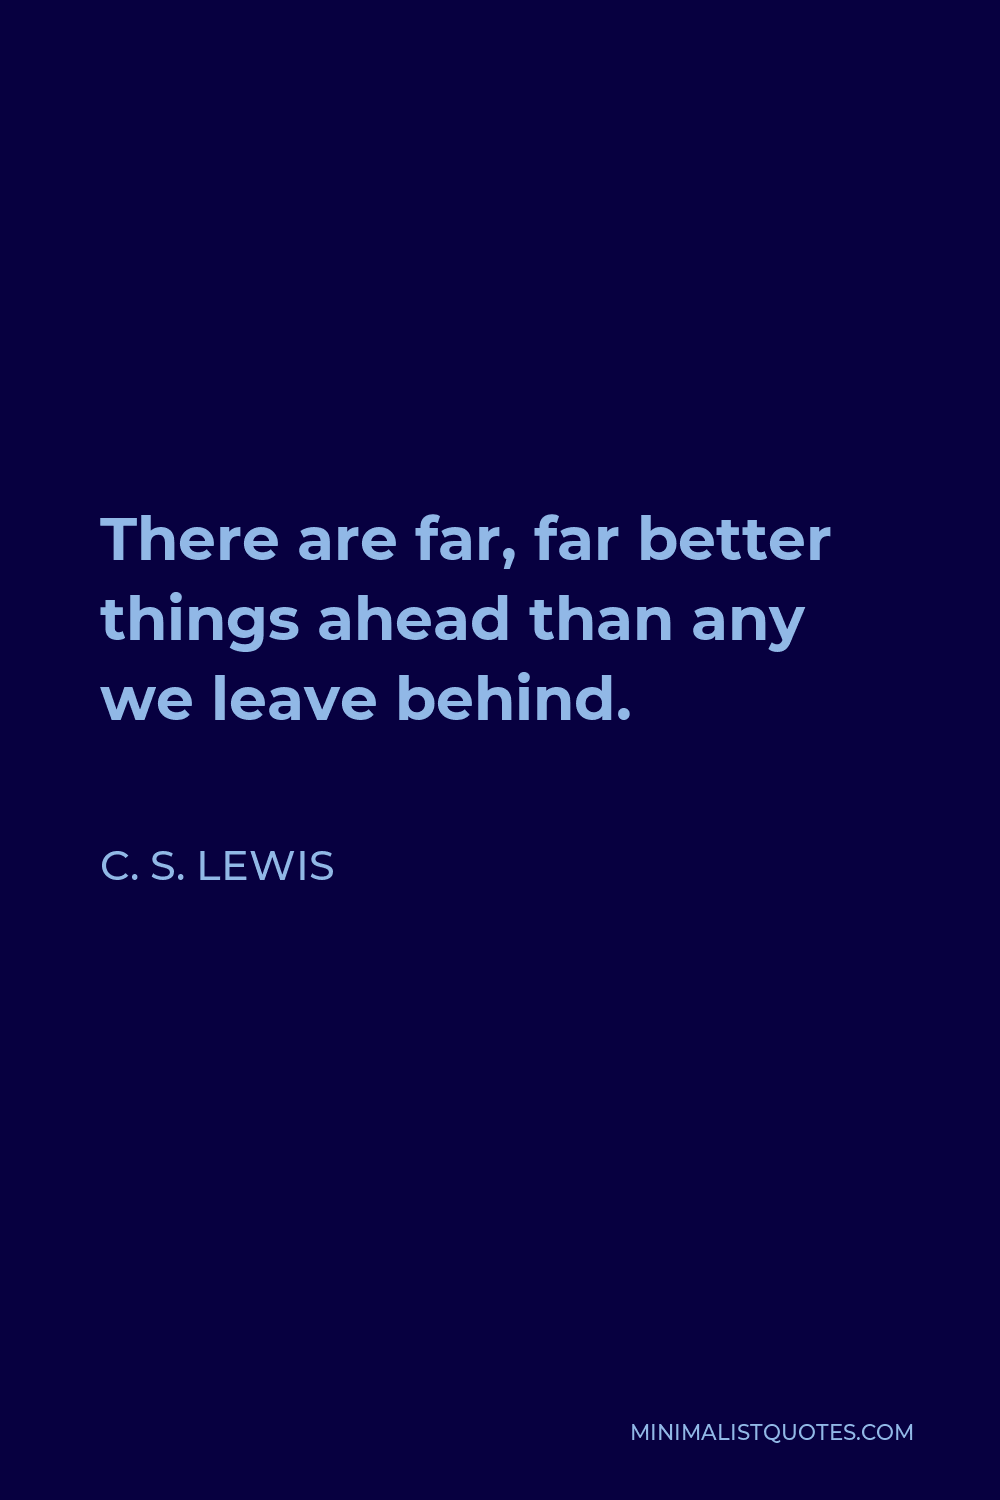 C. S. Lewis Quote - There are far, far better things ahead than any we leave behind.